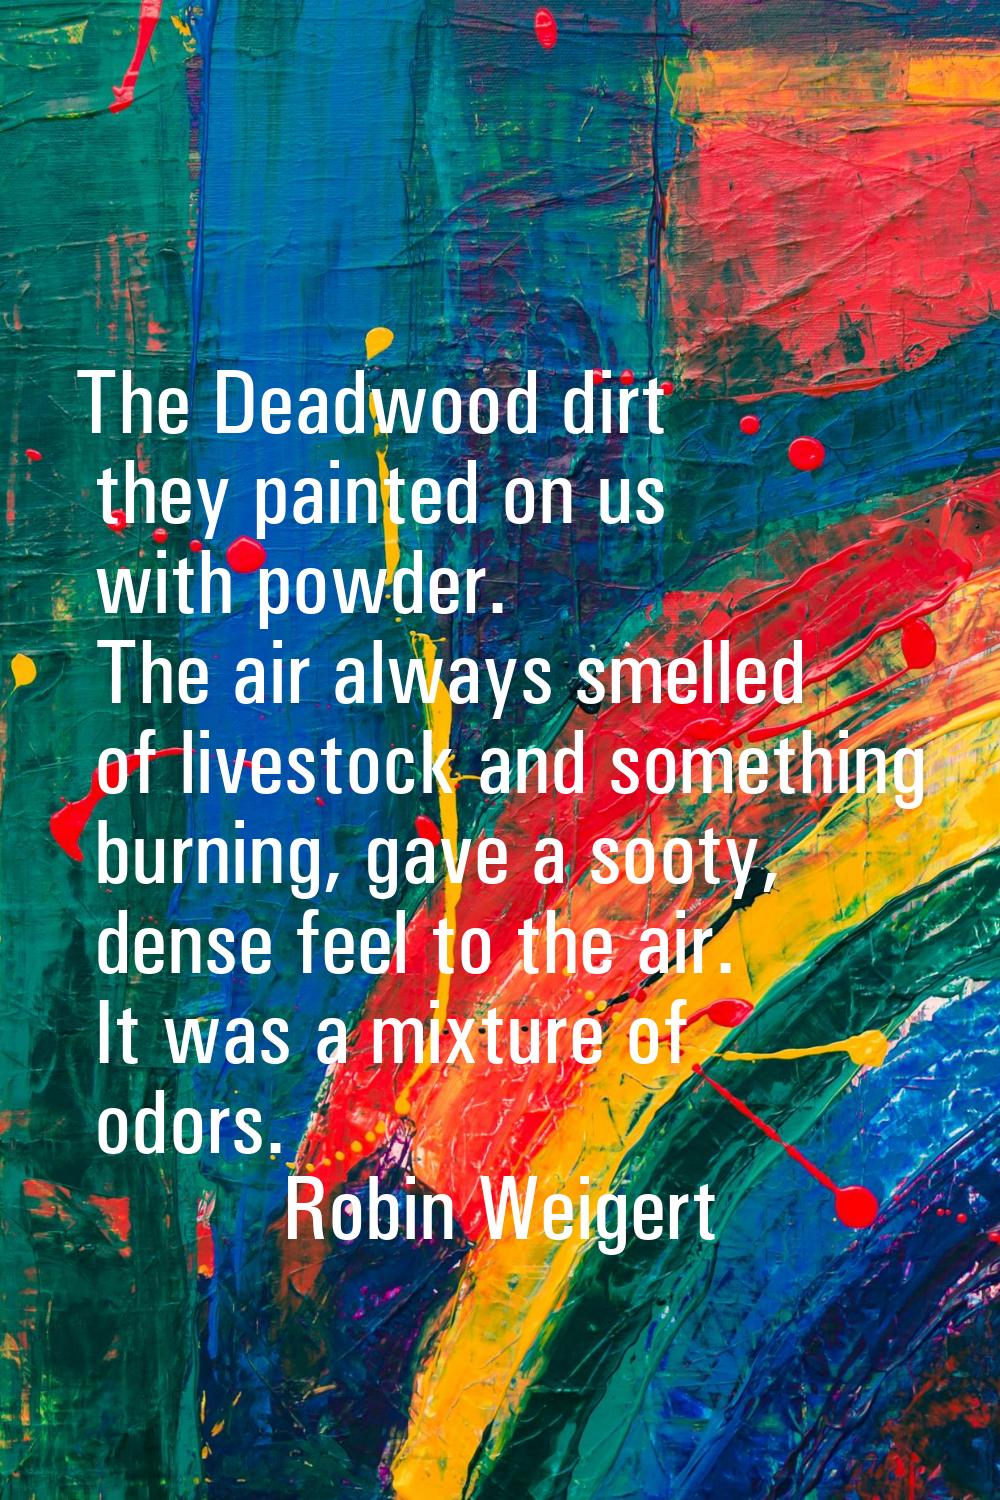 The Deadwood dirt they painted on us with powder. The air always smelled of livestock and something